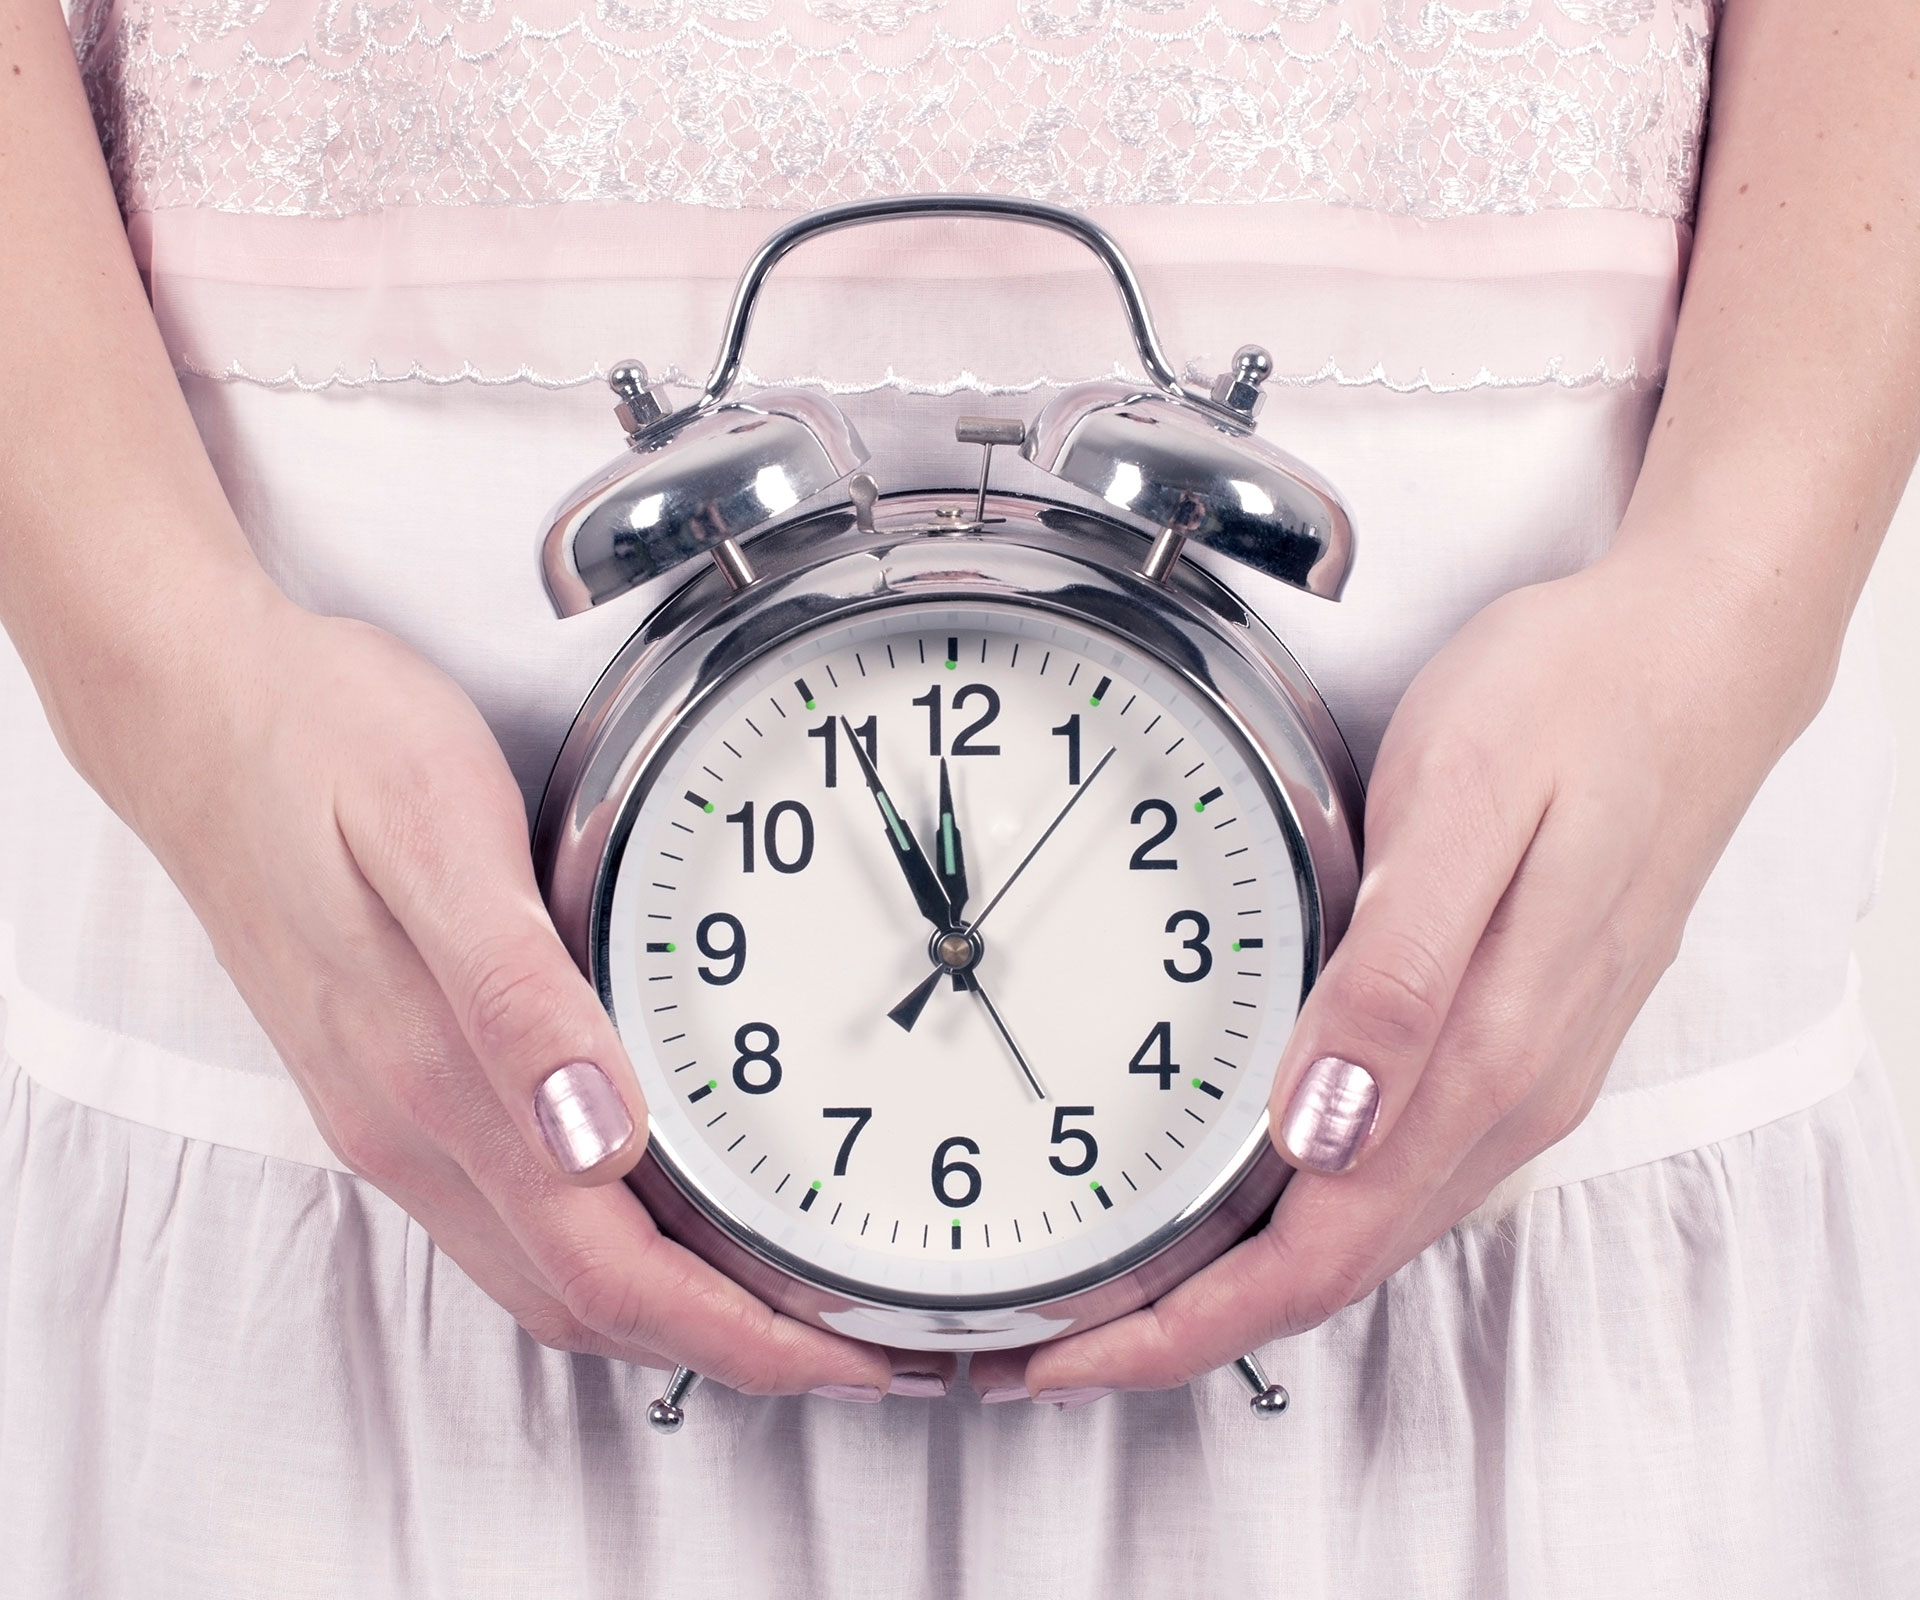 How much time is really left on your biological clock?